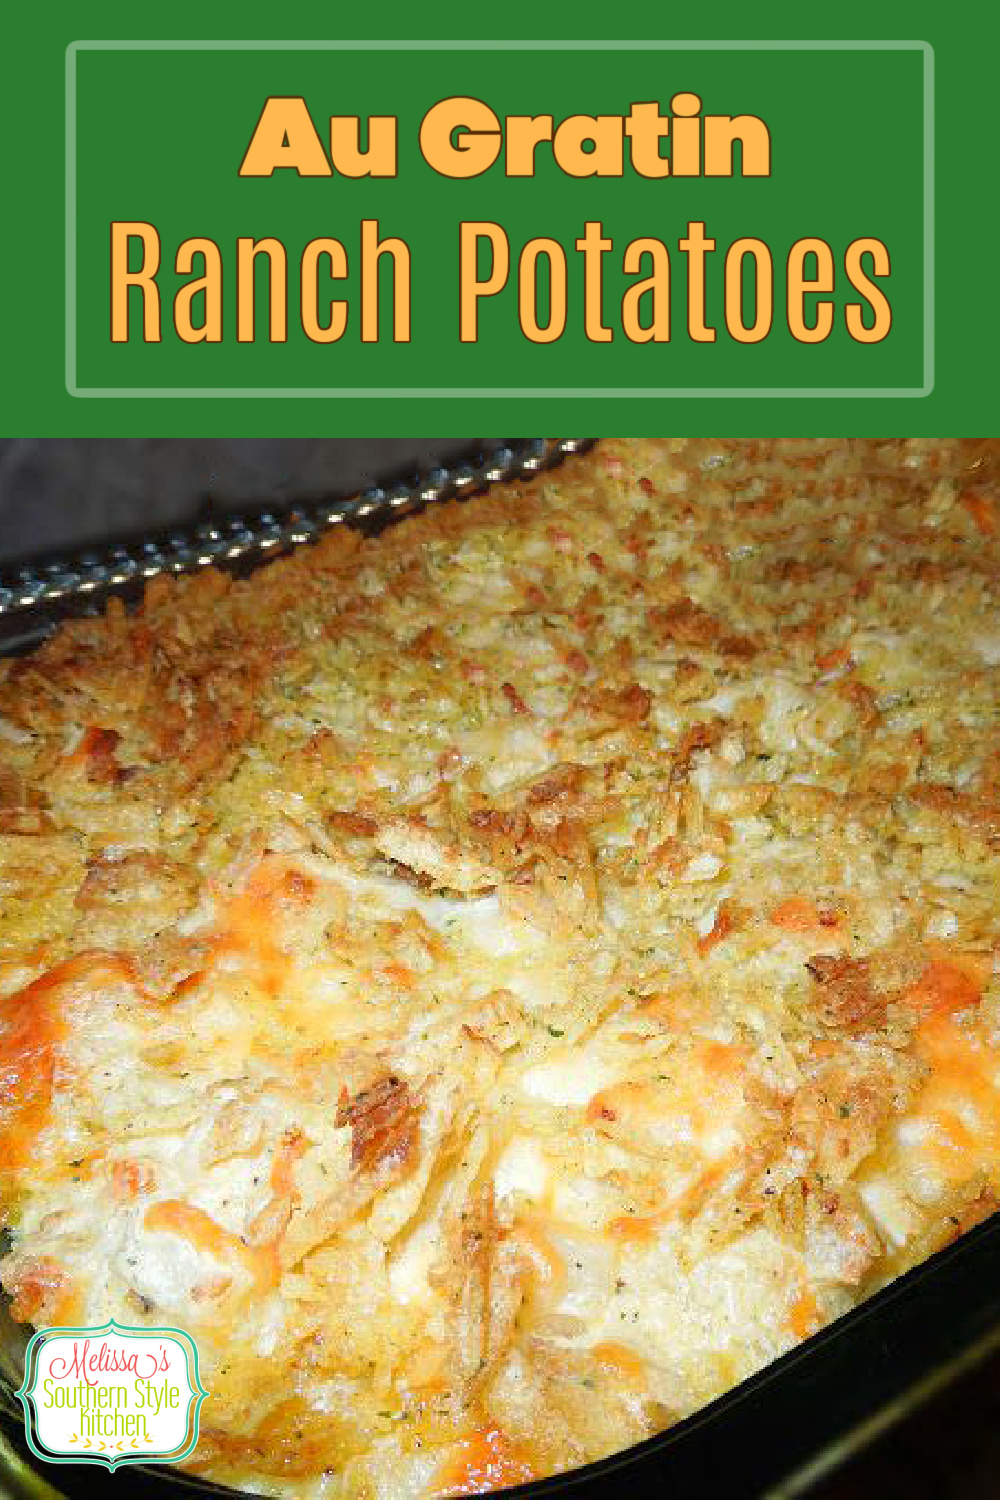 These cheesy Au Gratin Ranch Potatoes require a simple preparation that makes them ideal for family dinners and entertaining alike. #augratinpotatoes #augratinranchpotatoes #potatocasserole #bakedpotatoes #cheesy #sidedishrecipes #southernrecipes #potatoes #easyrecipes #ranchdressing